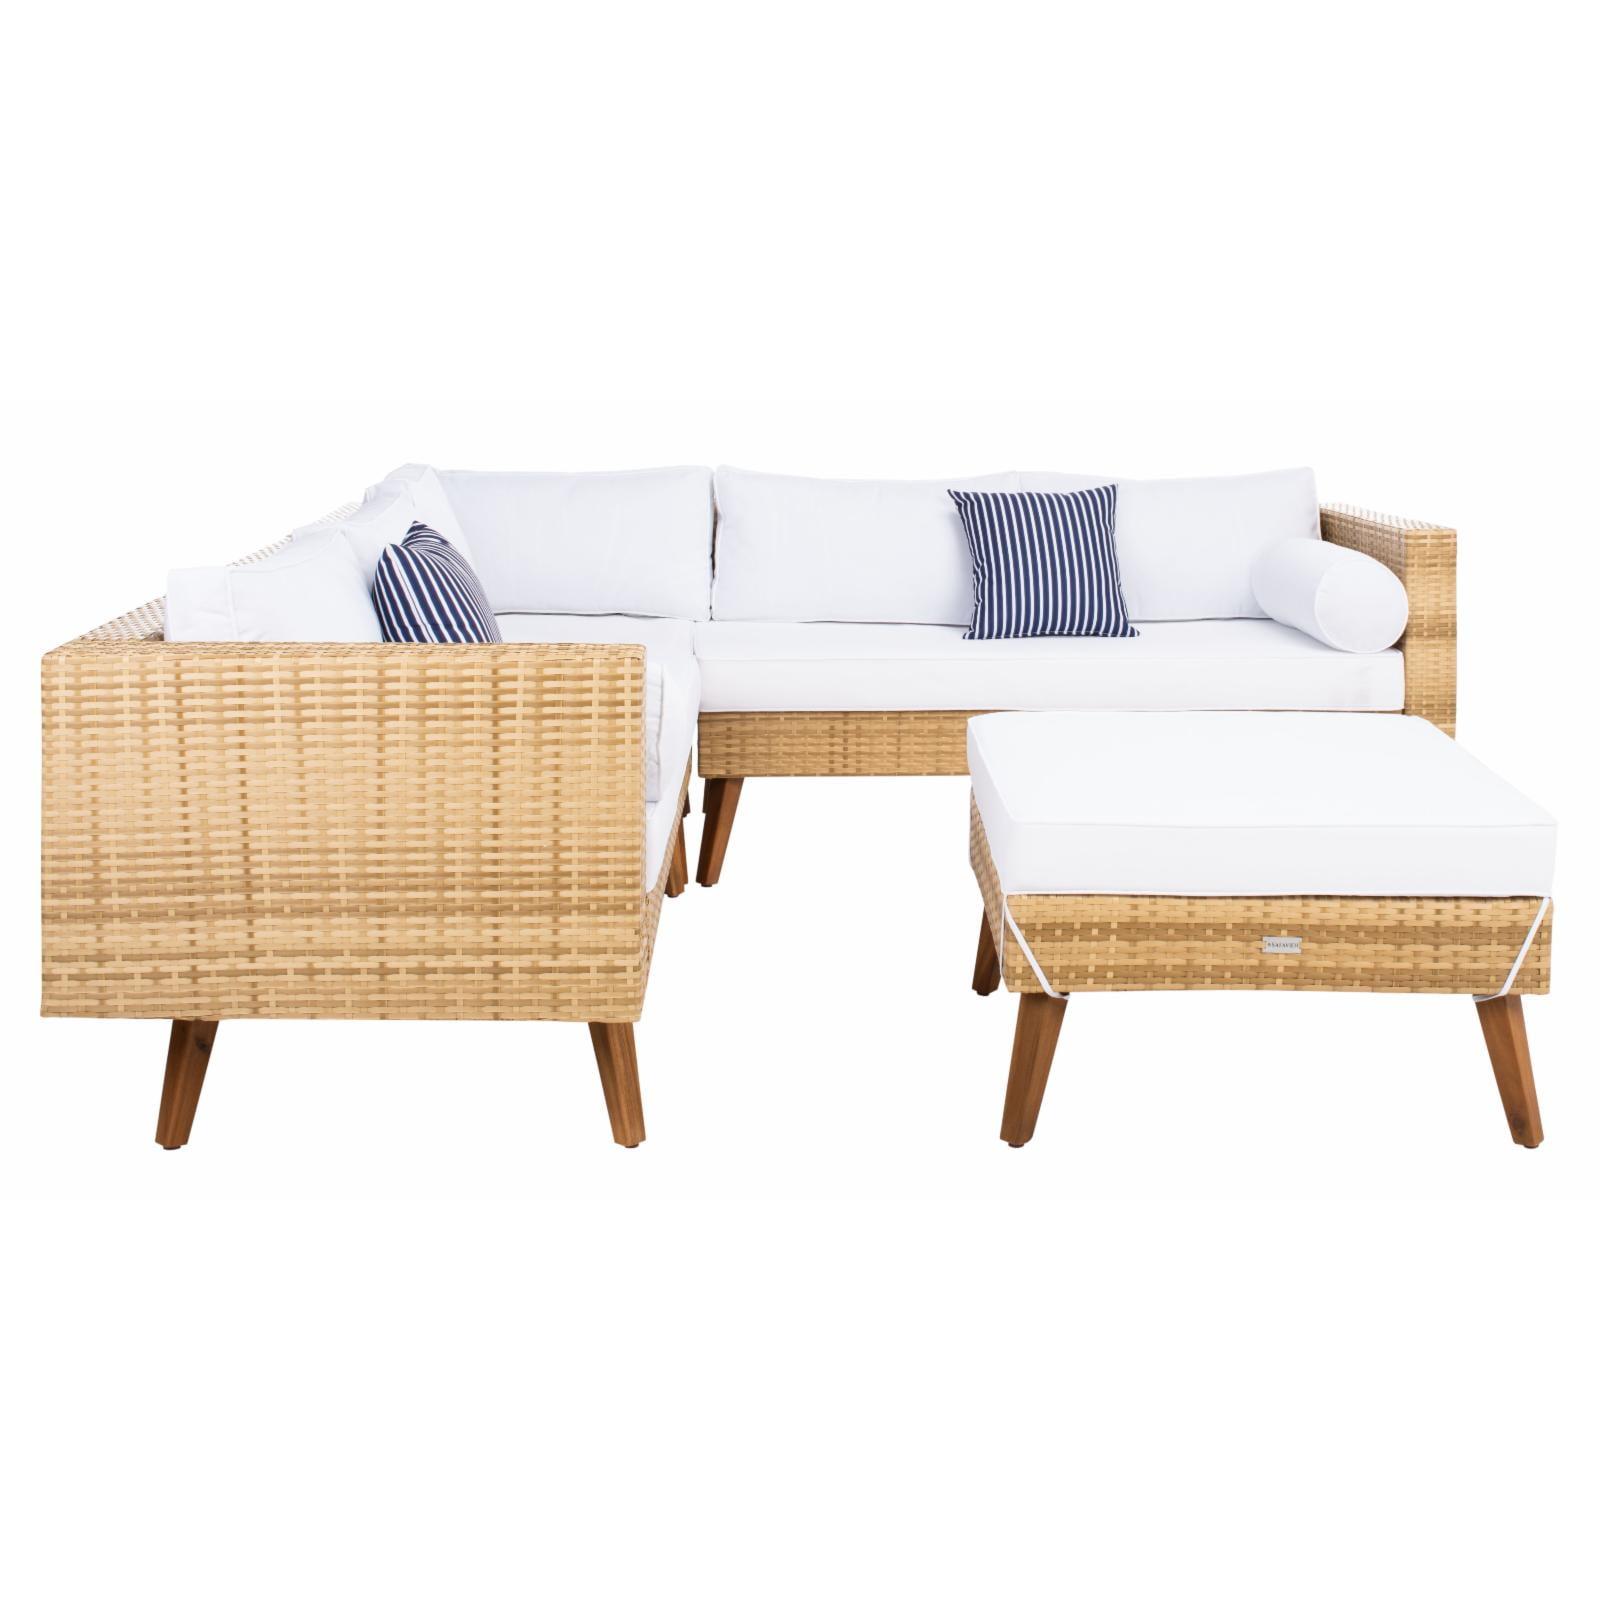 Analon Natural Wicker 5-Person Outdoor Sectional Set with White Cushions